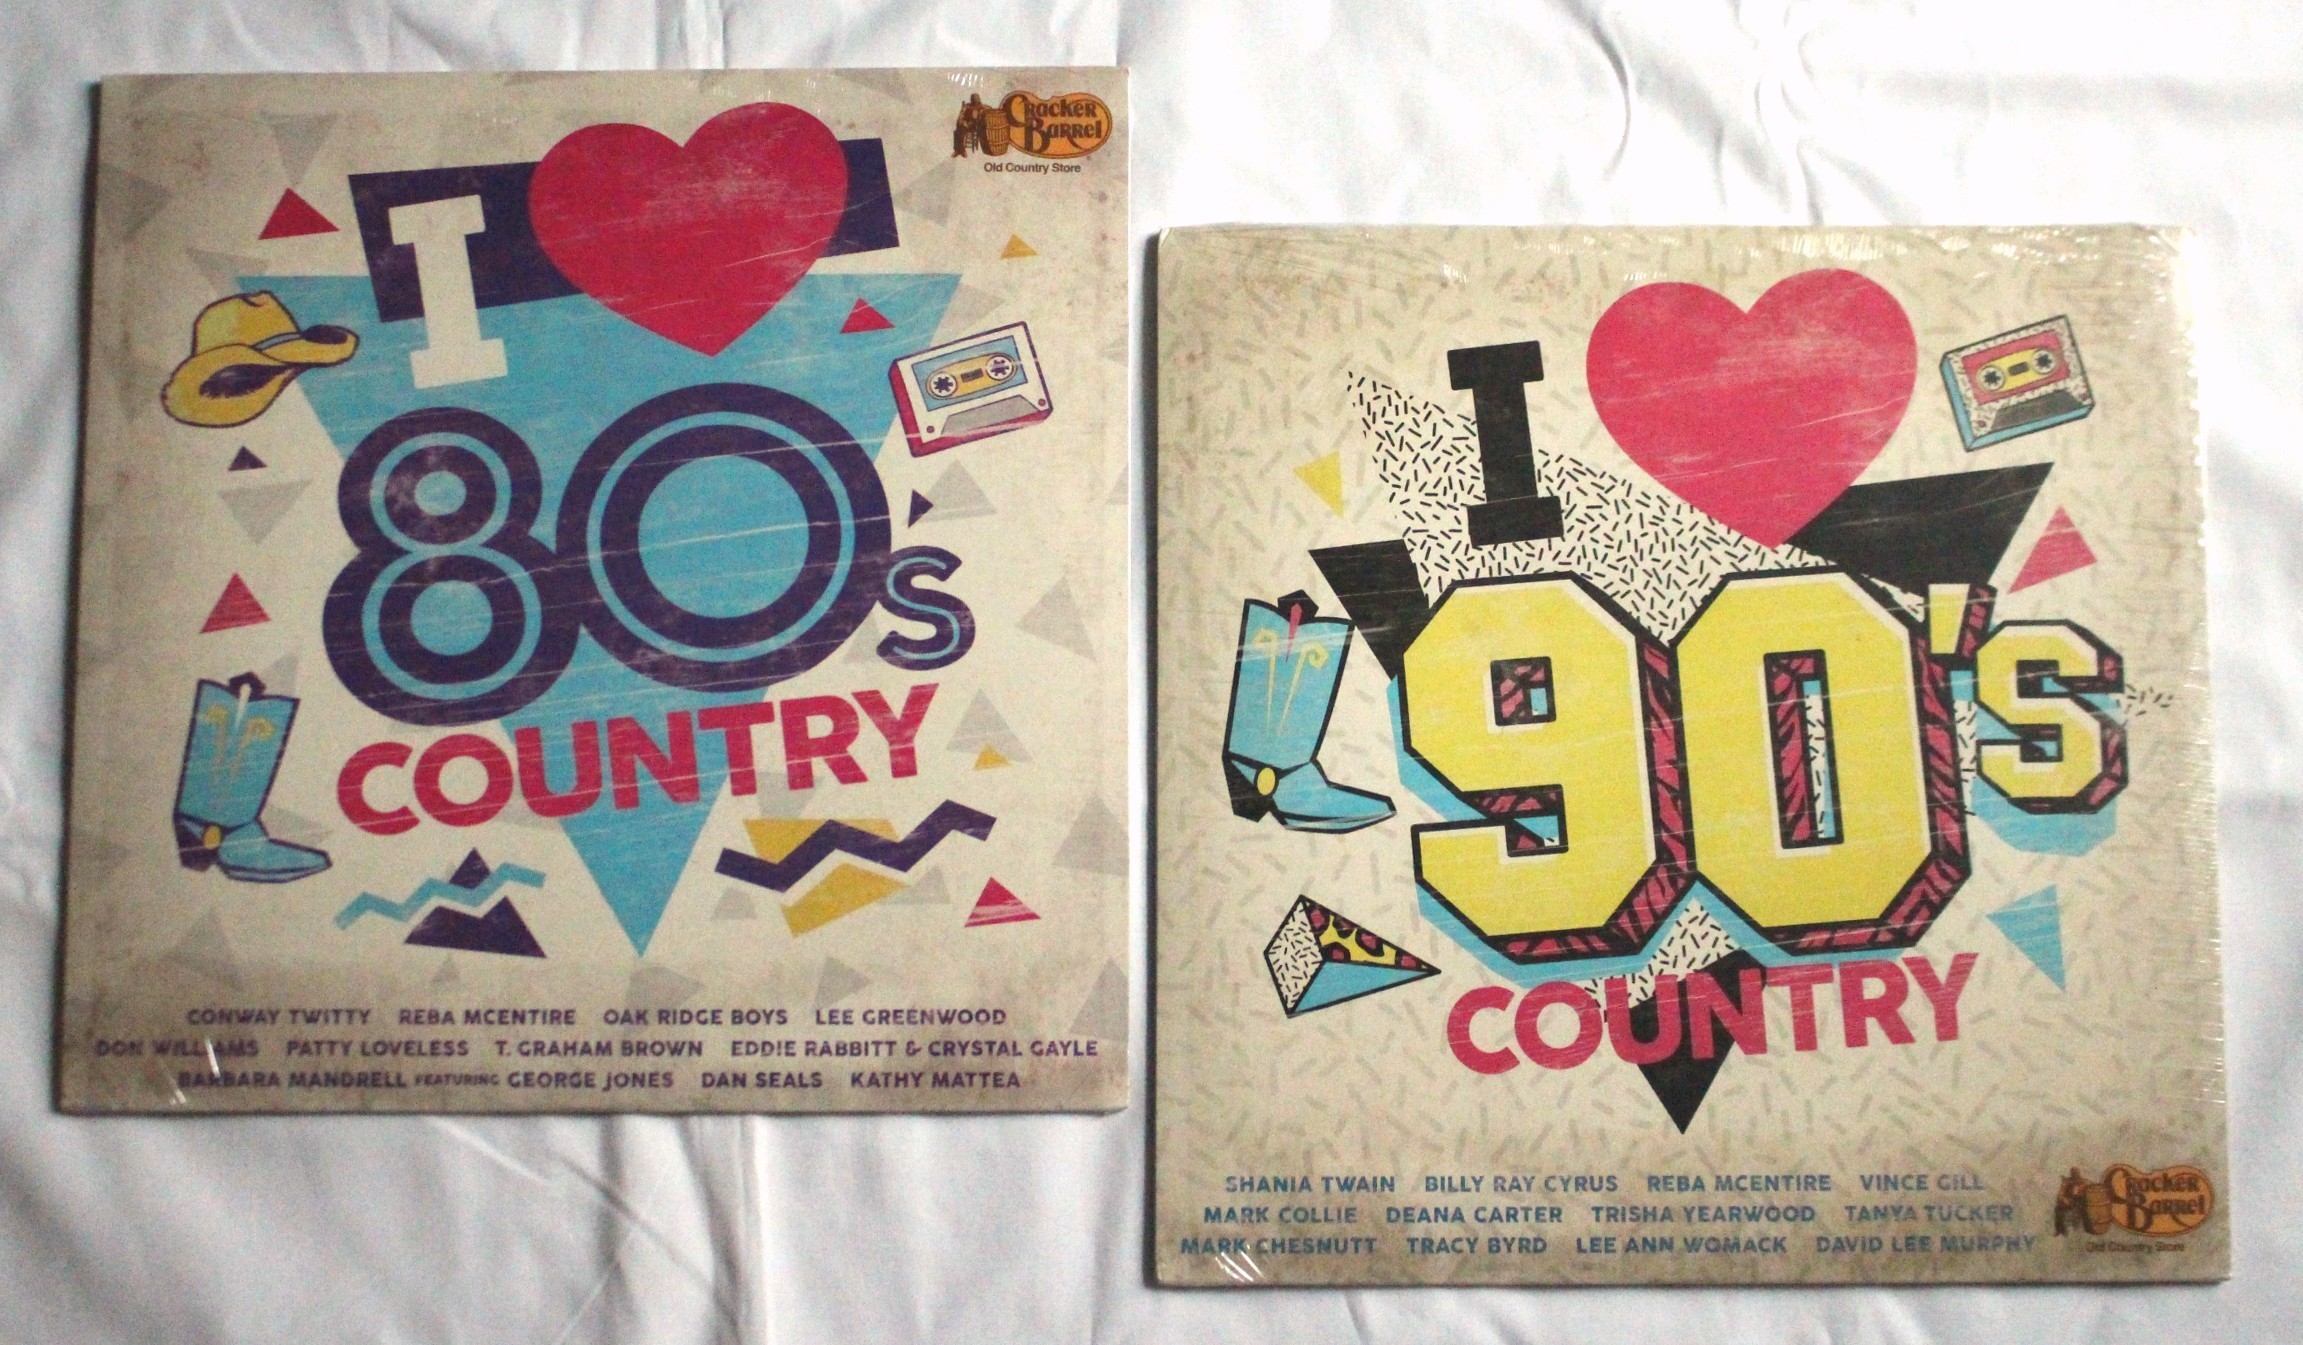 Various Artists - vinyl LPs “I Love 80’s Country” & “I Love 90’s Country”